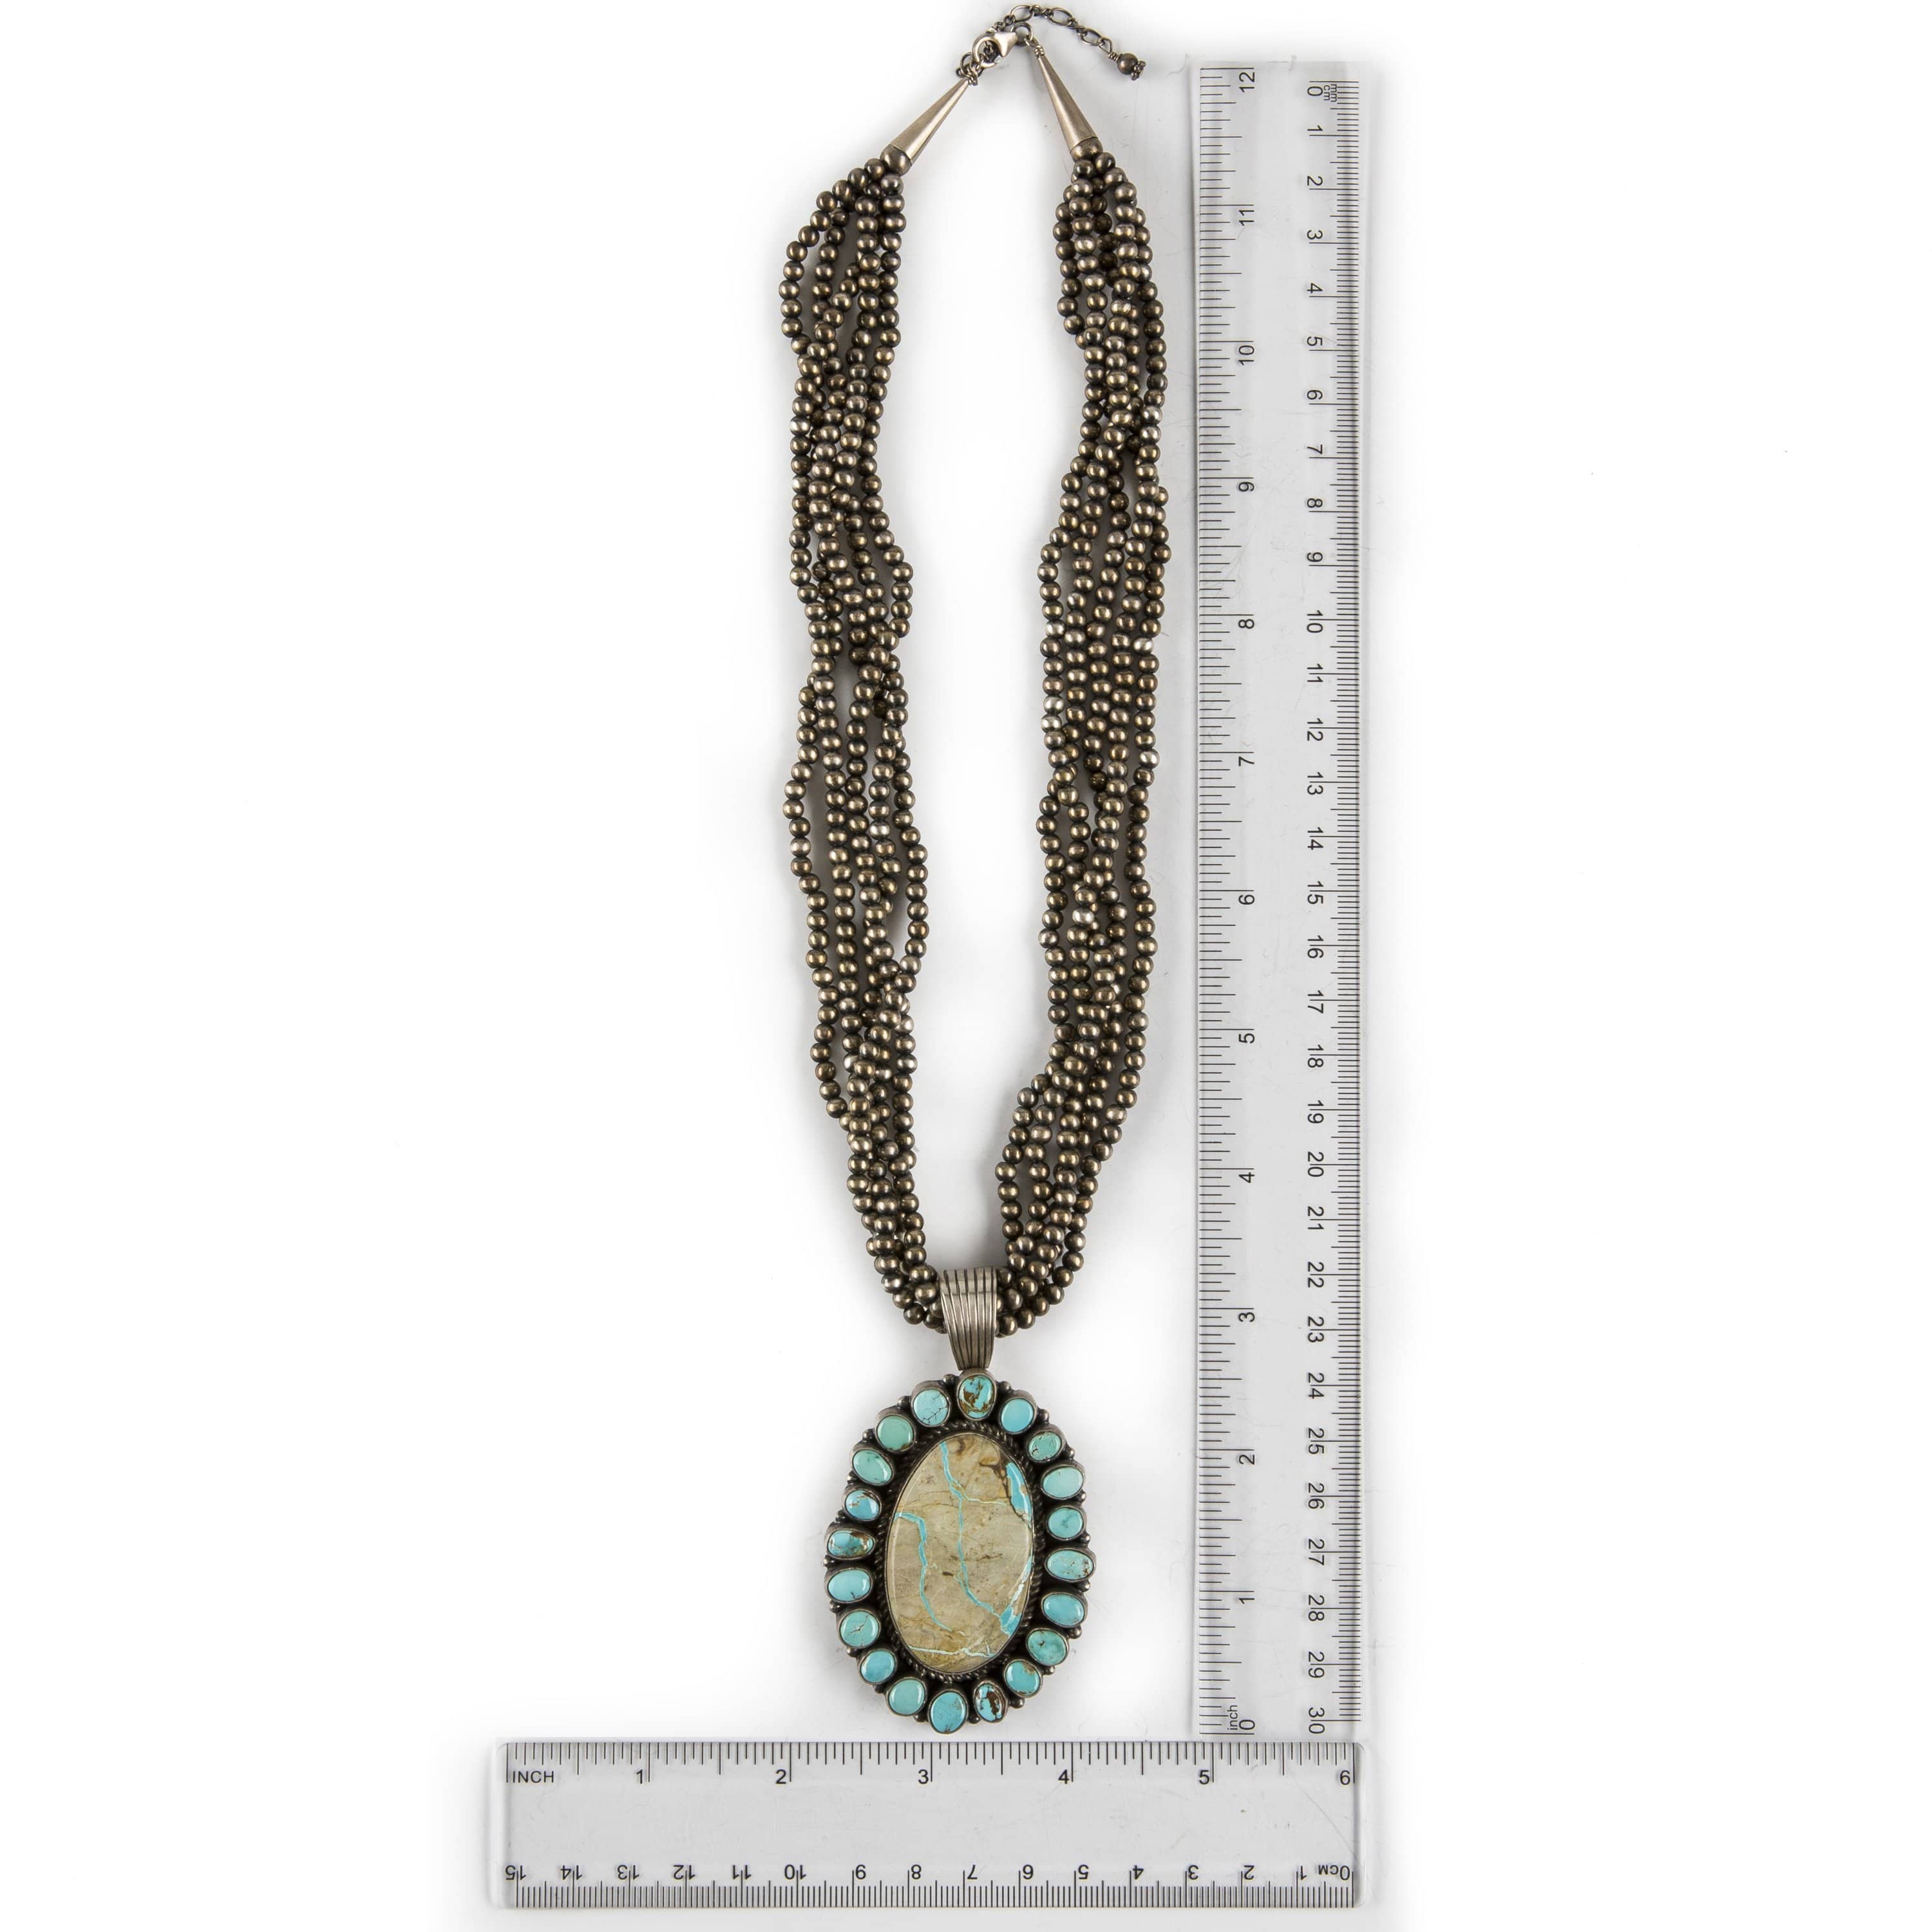 Kalifano Native American Jewelry Dry Creek and Boulder Turquoise Pendant with Navajo Pearl Necklace USA Native American Made 925 Sterling Silver Set NAN3000.004